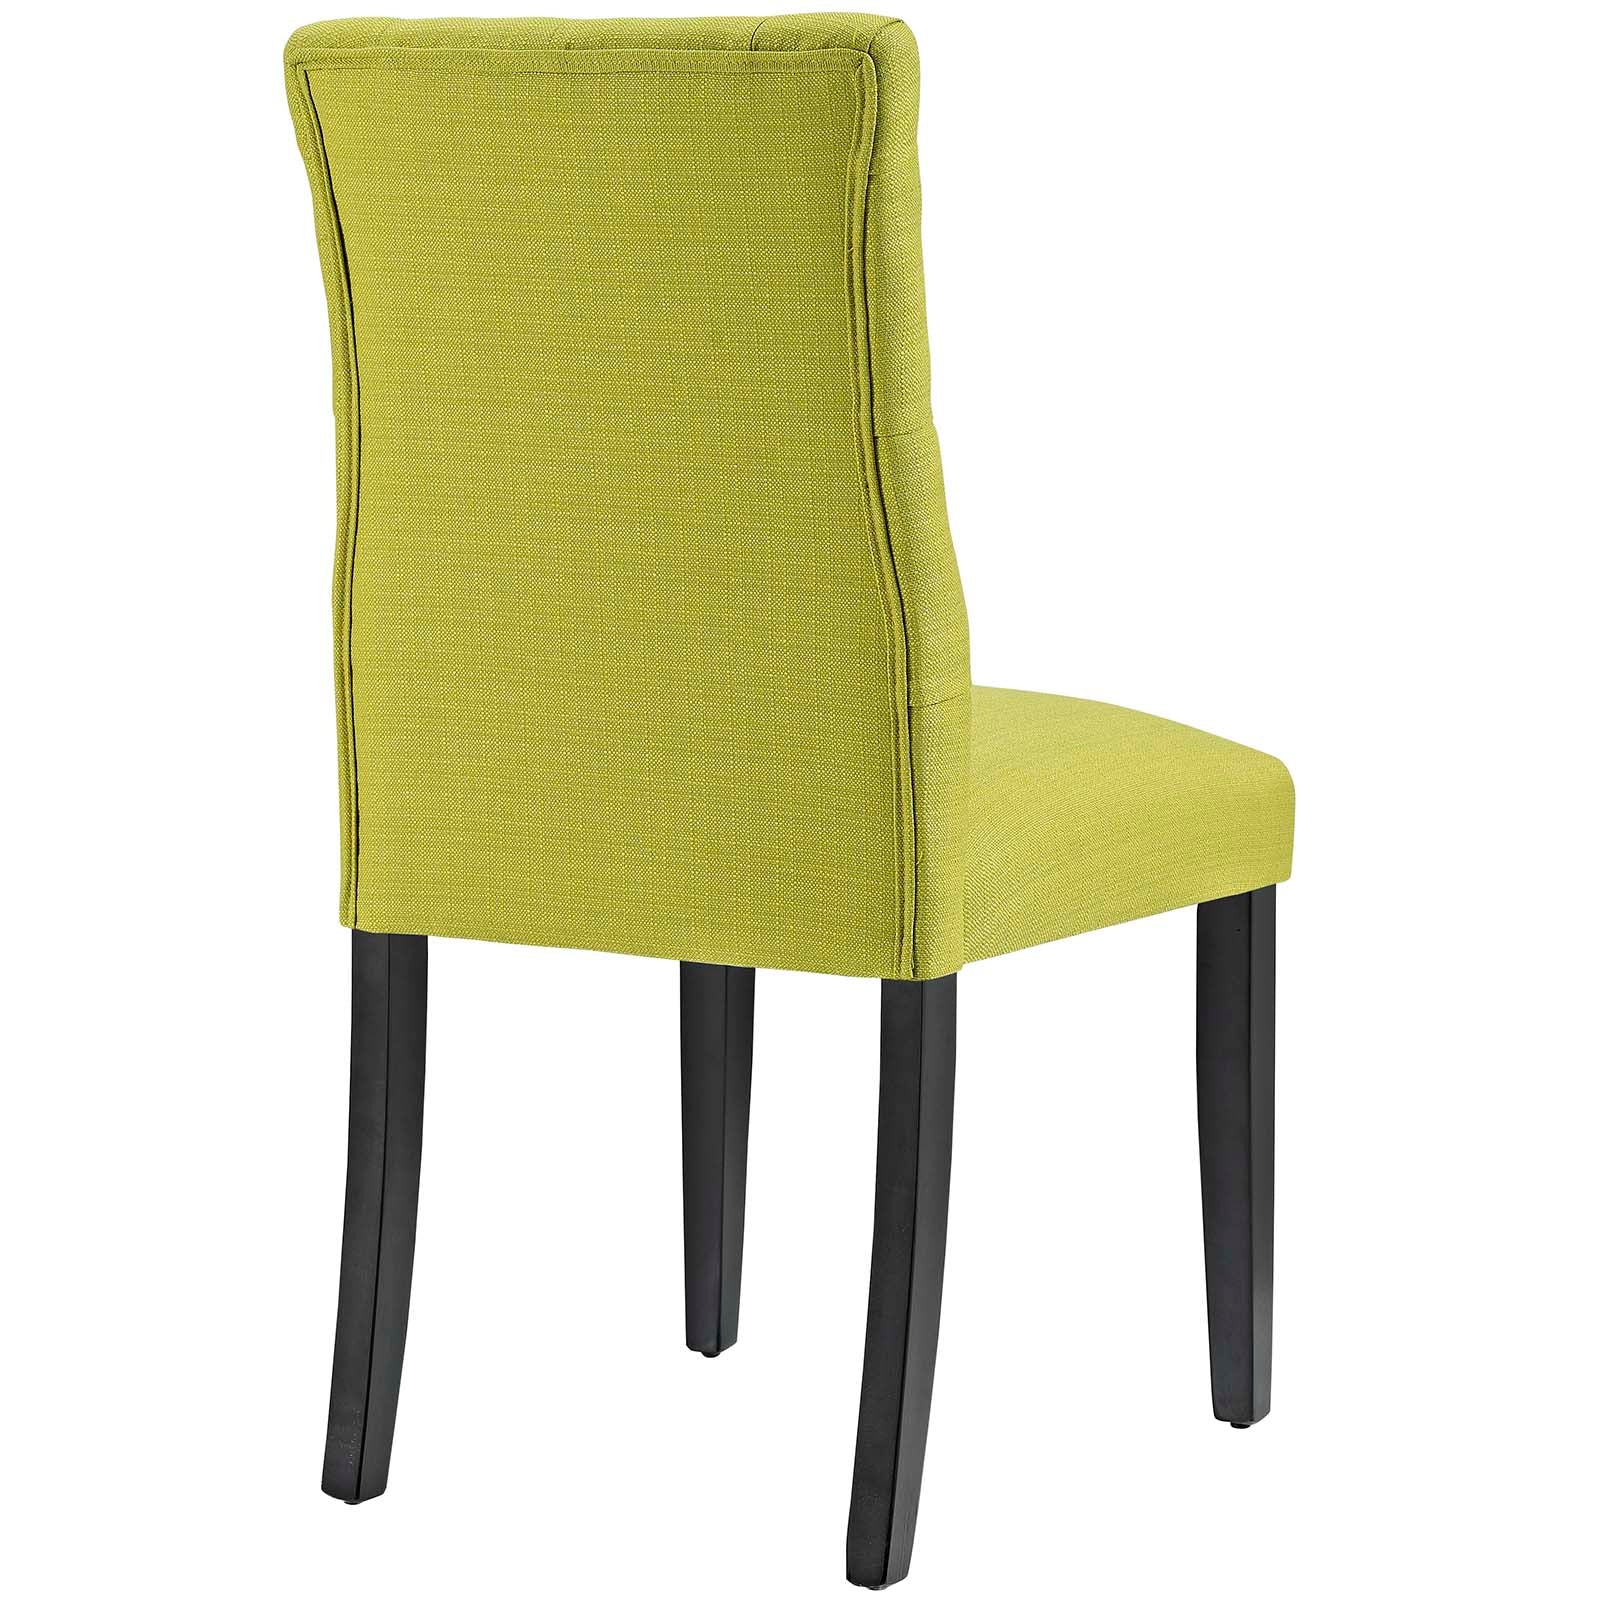 Duchess Dining Chair Fabric Set of 4 - East Shore Modern Home Furnishings